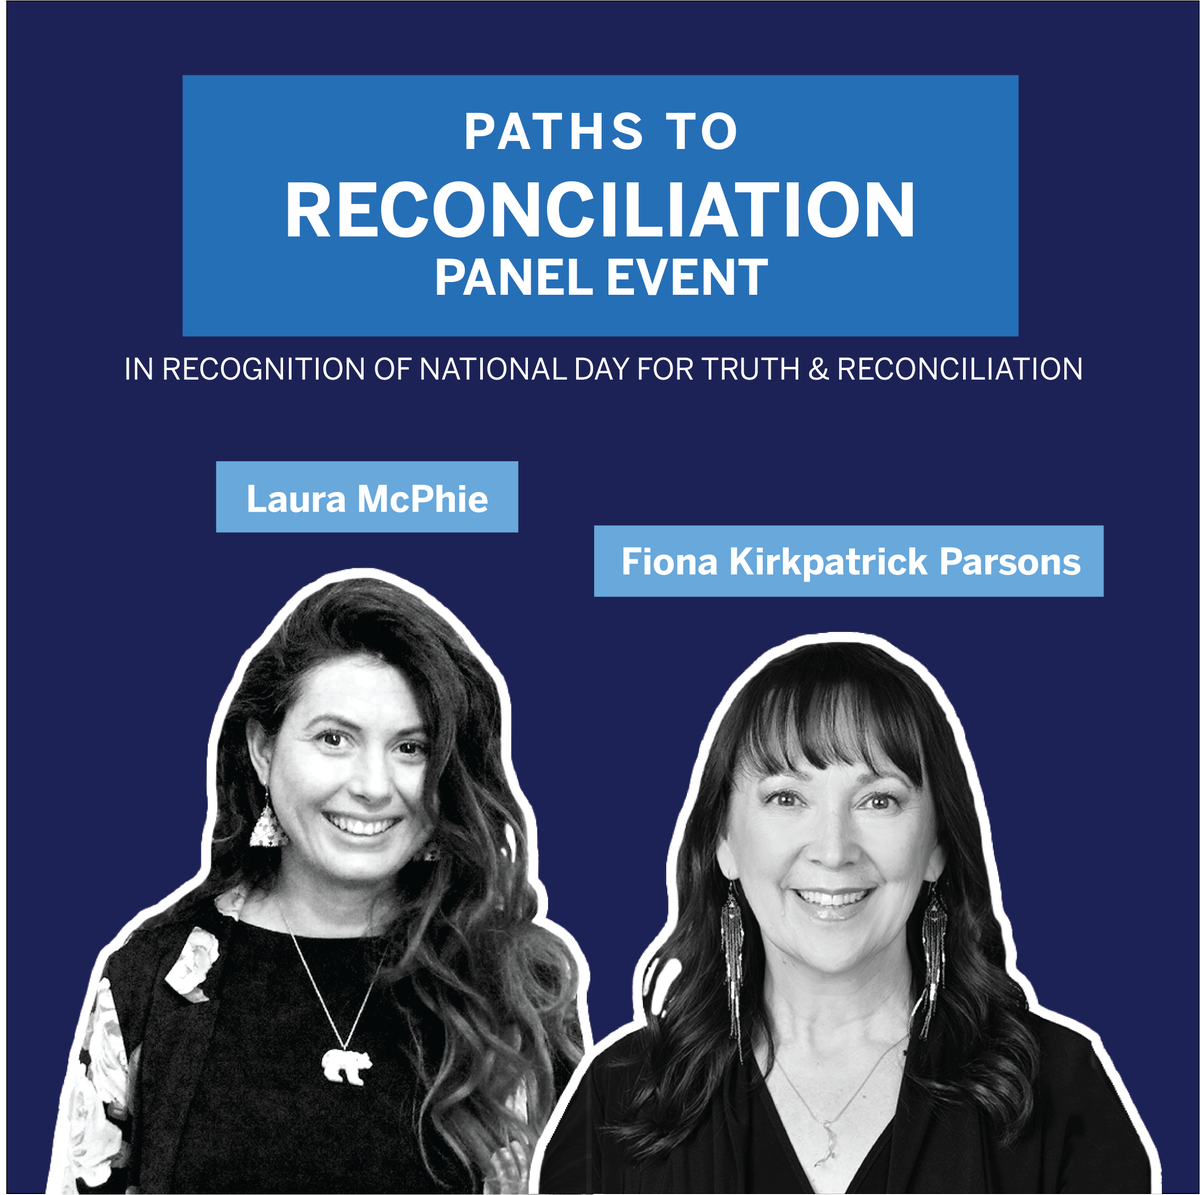 National Day for #TruthAndReconciliation is an opportunity to reflect & learn., #TeamAmex hosted a discussion for colleagues focused on paths to reconciliation featuring @lamcphie and @fkparsons.